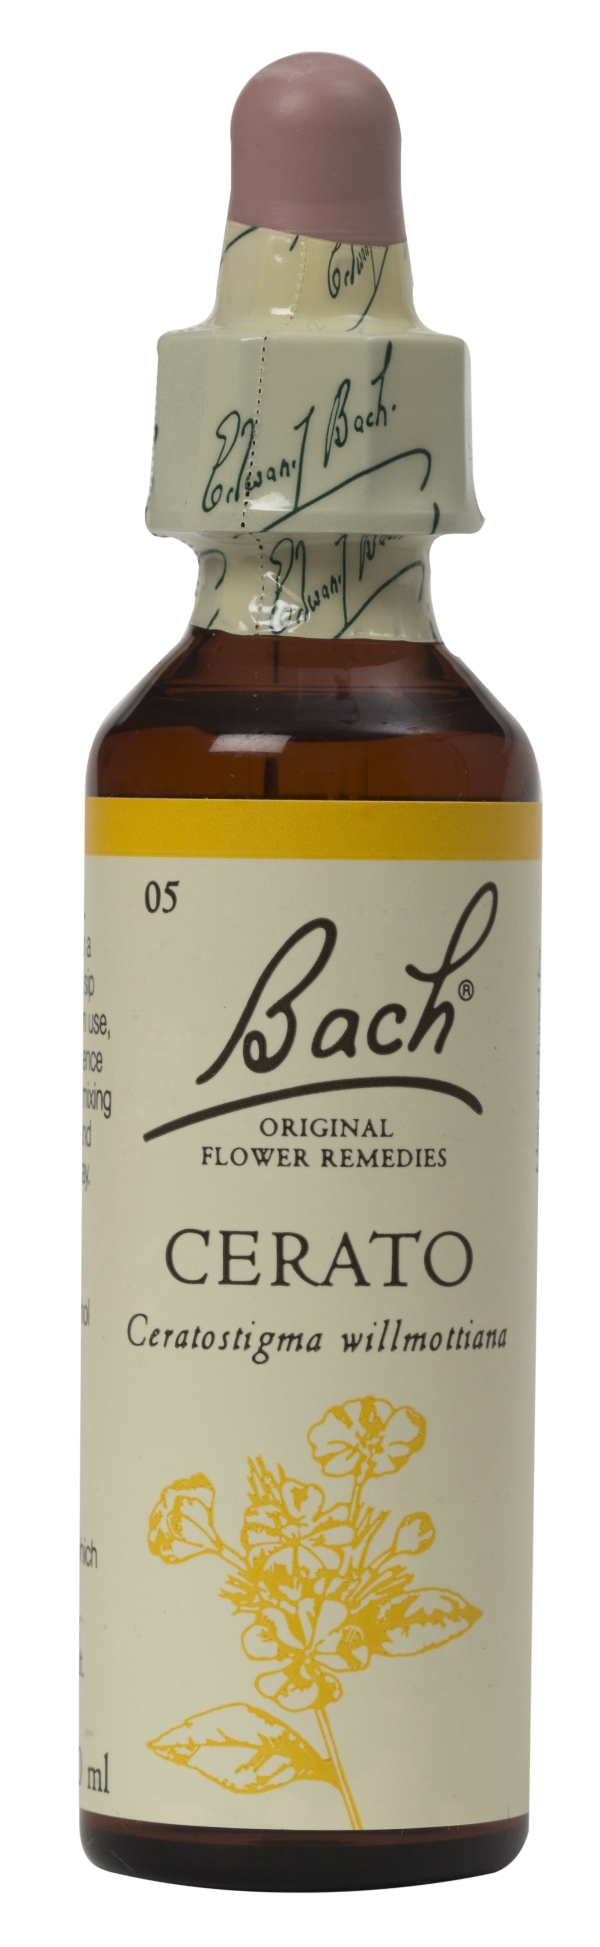 Nelson Bach Flower Remedies: Bach Cerato  Flower Remedy (20ml) available online here